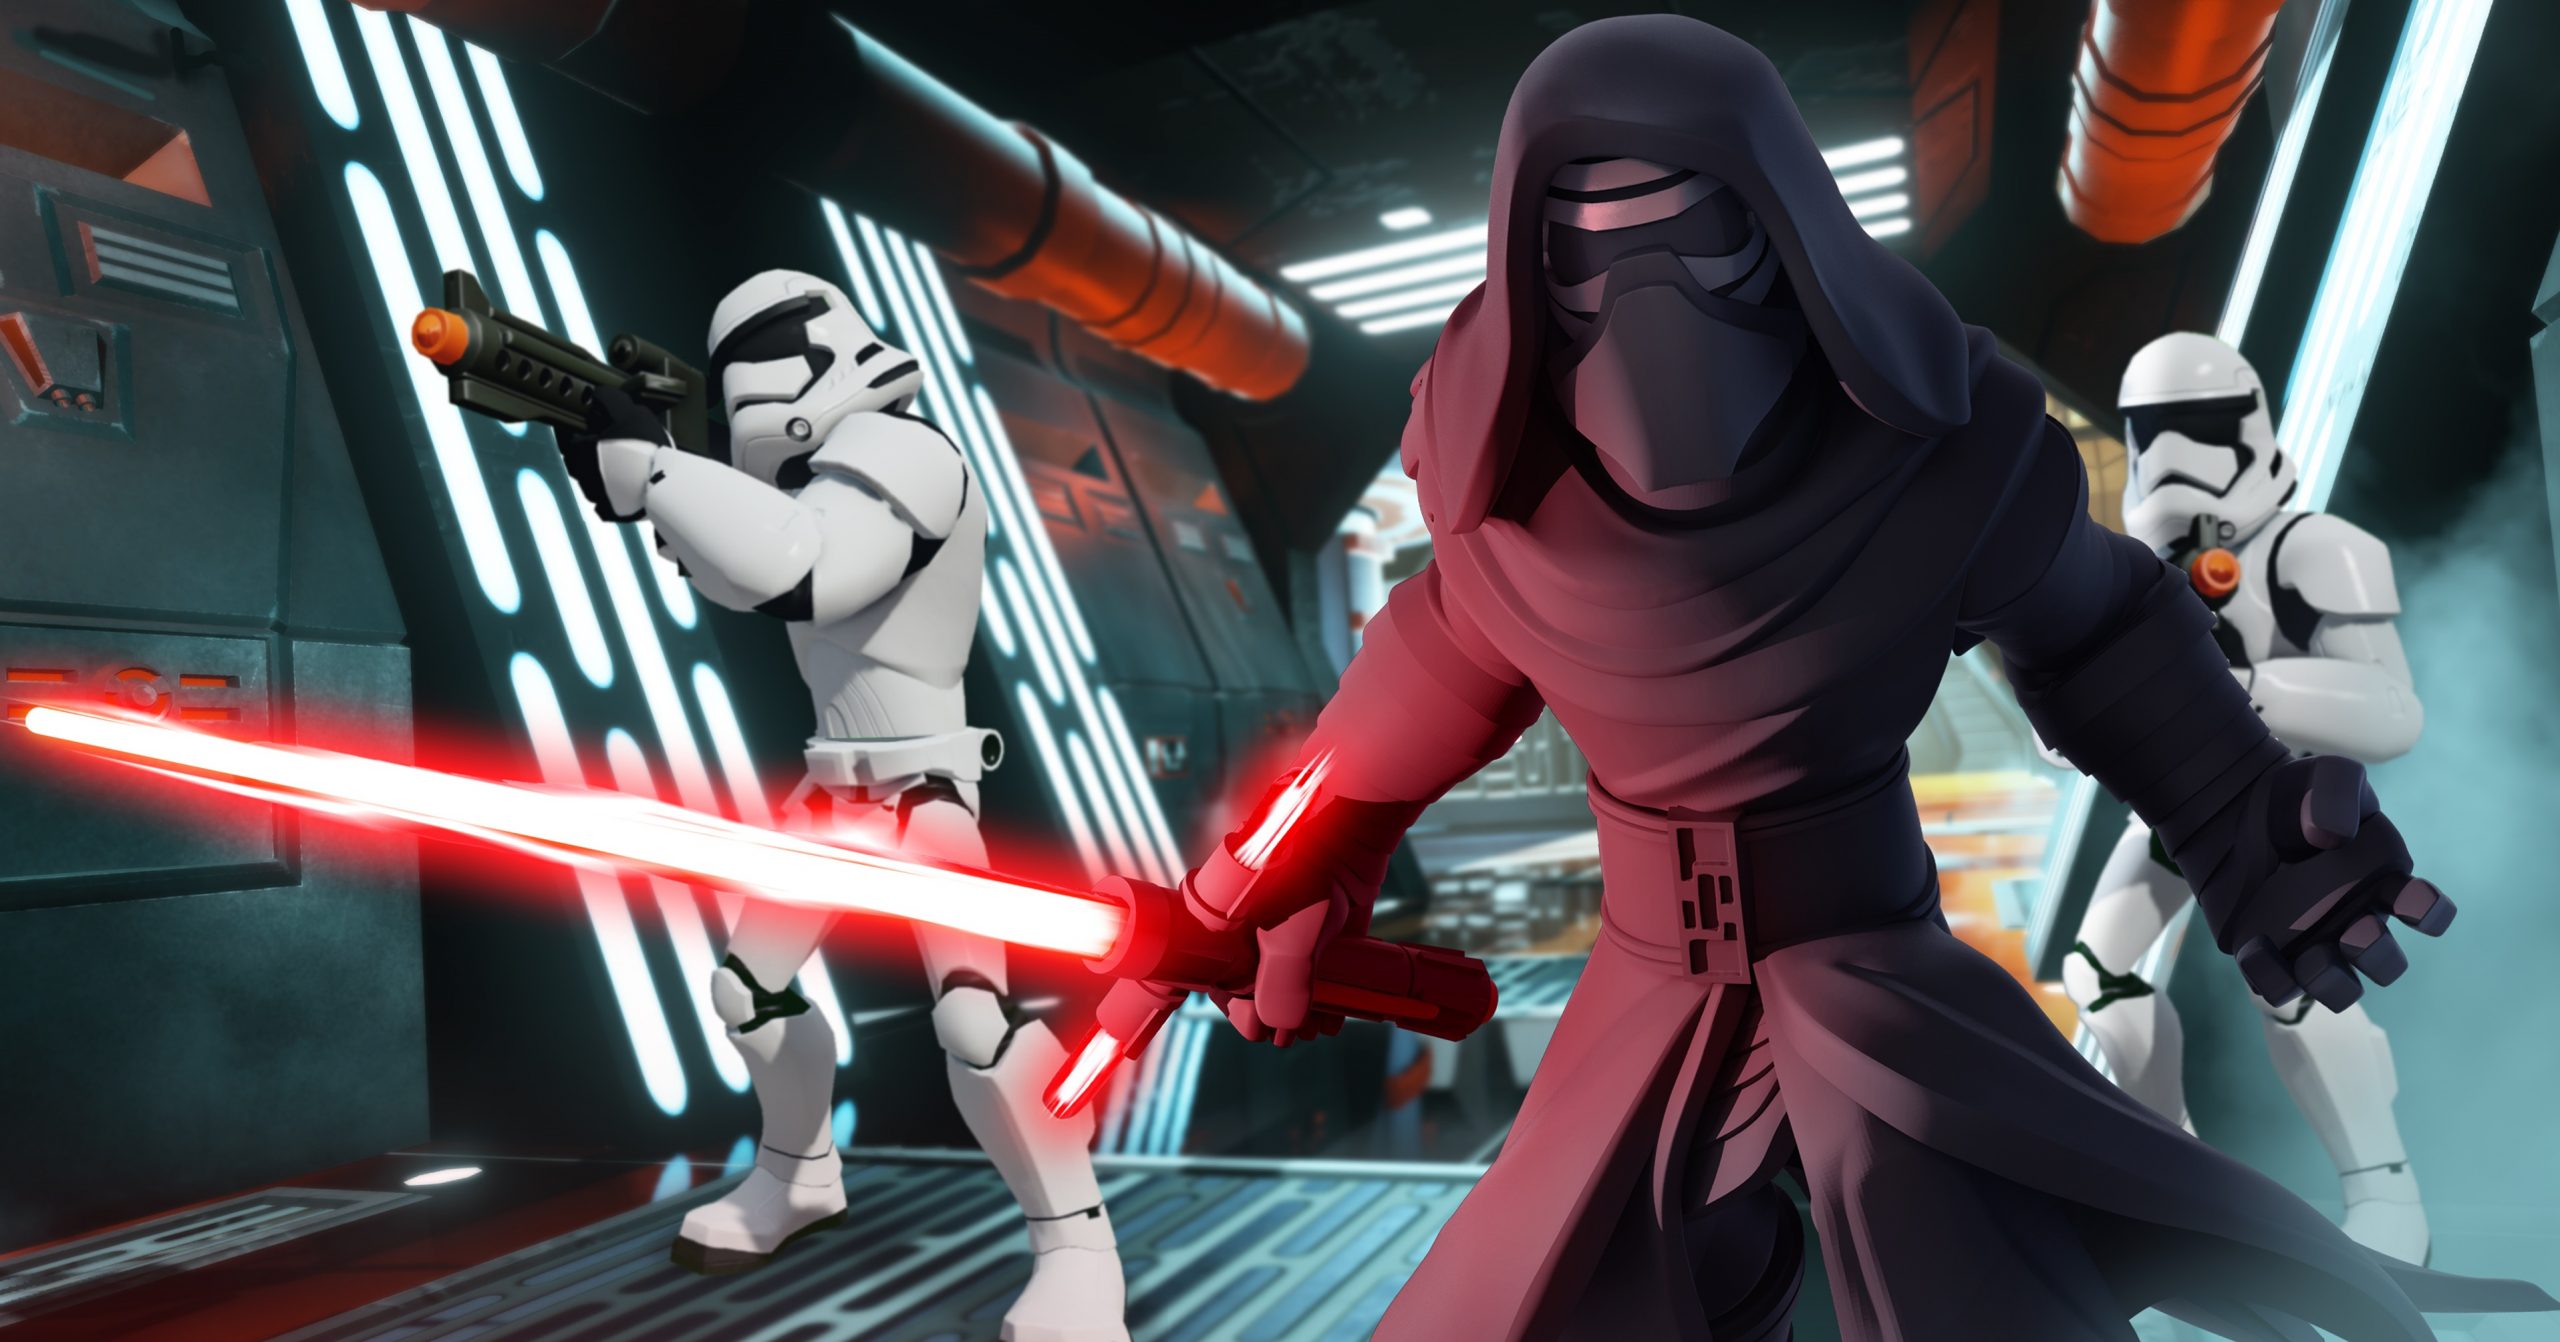 Which Star Wars: The Force Awakens Characters Will Be Playable In Disney Infinity?